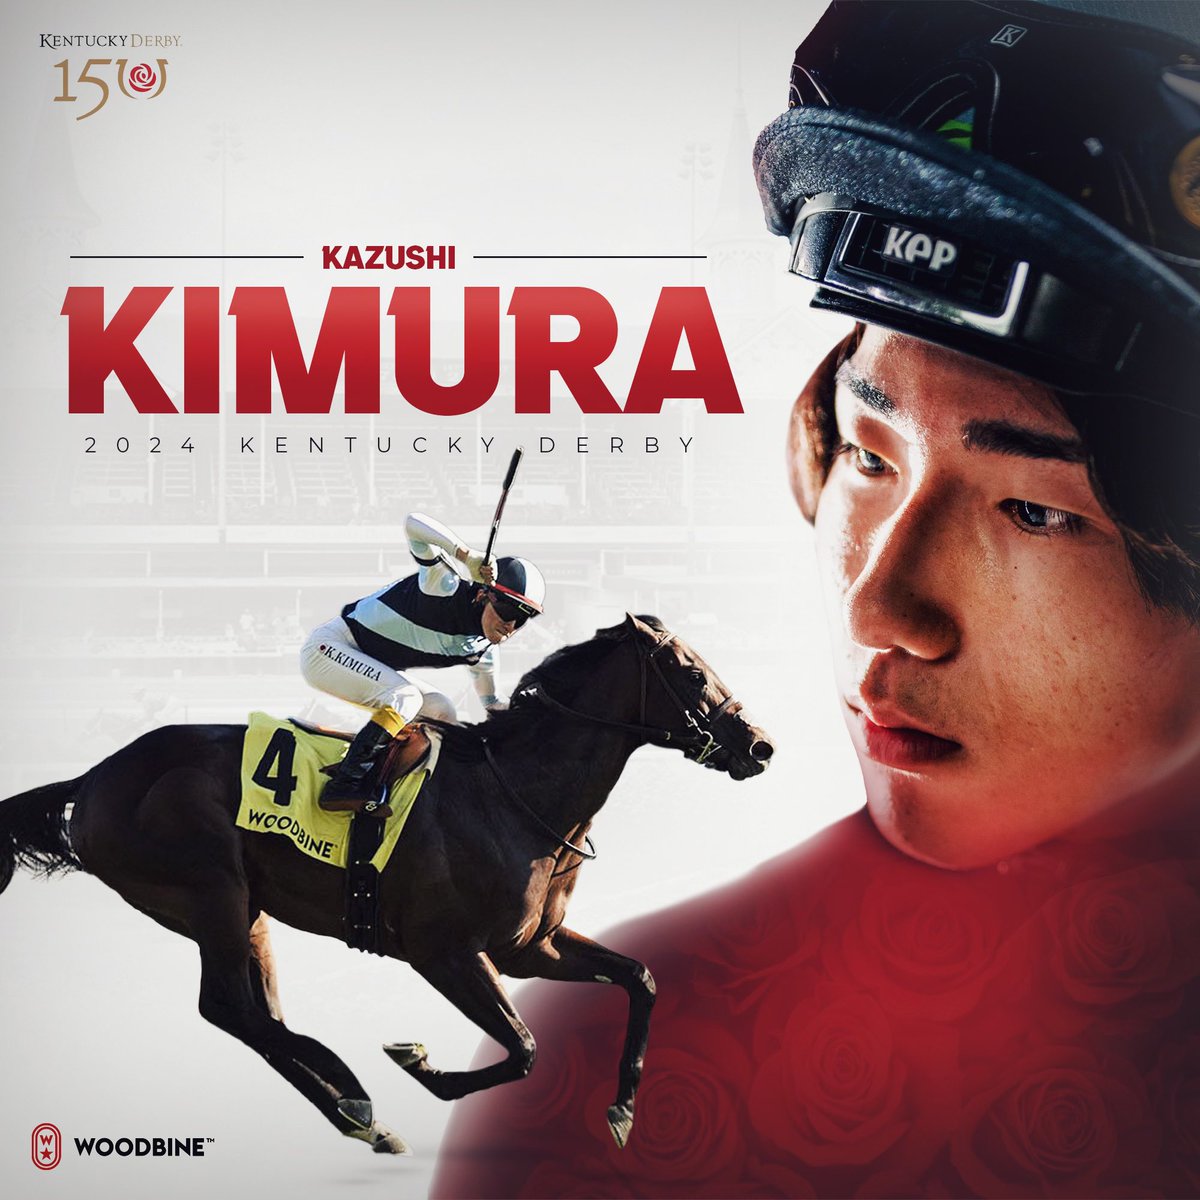 Today’s the day to make history KK! @KentuckyDerby #KyDerby Best of luck today @kazushi0096